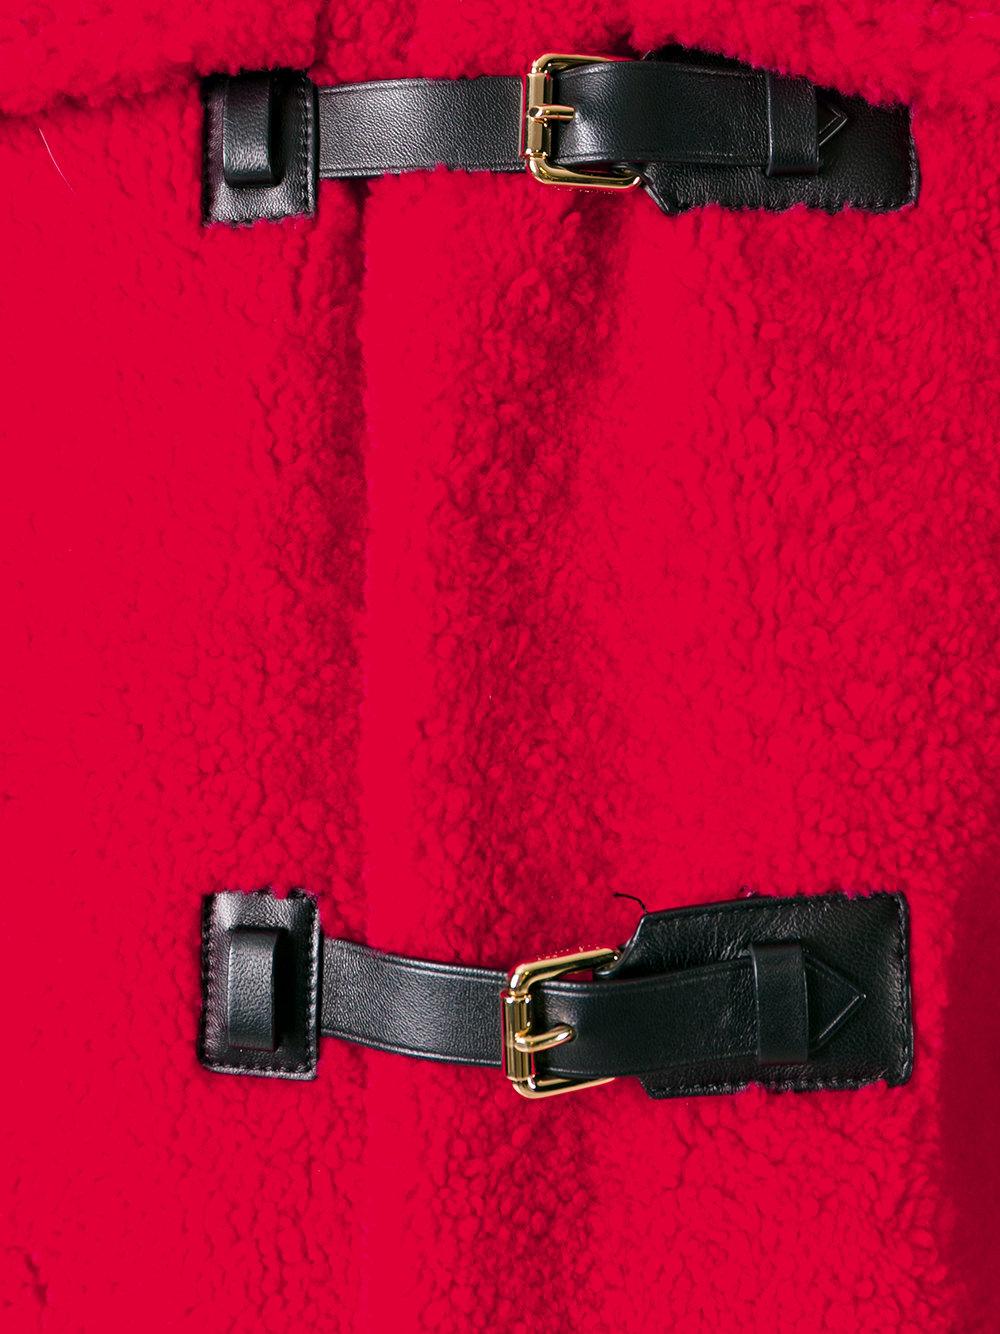 Louis Vuitton Buckled Shearling Jacket in Red - Lyst